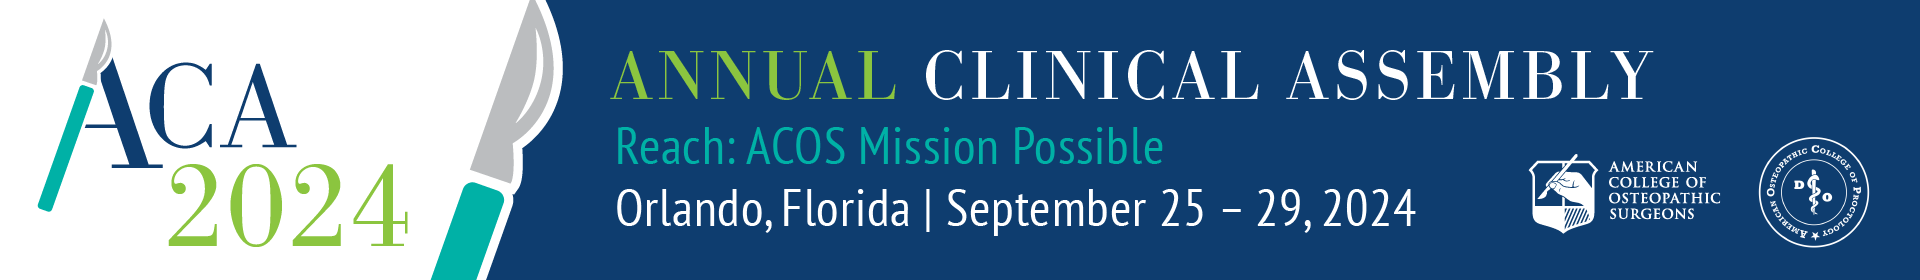 2024 Annual Clinical Assembly of Osteopathic Surgeons (ACA) Event Banner